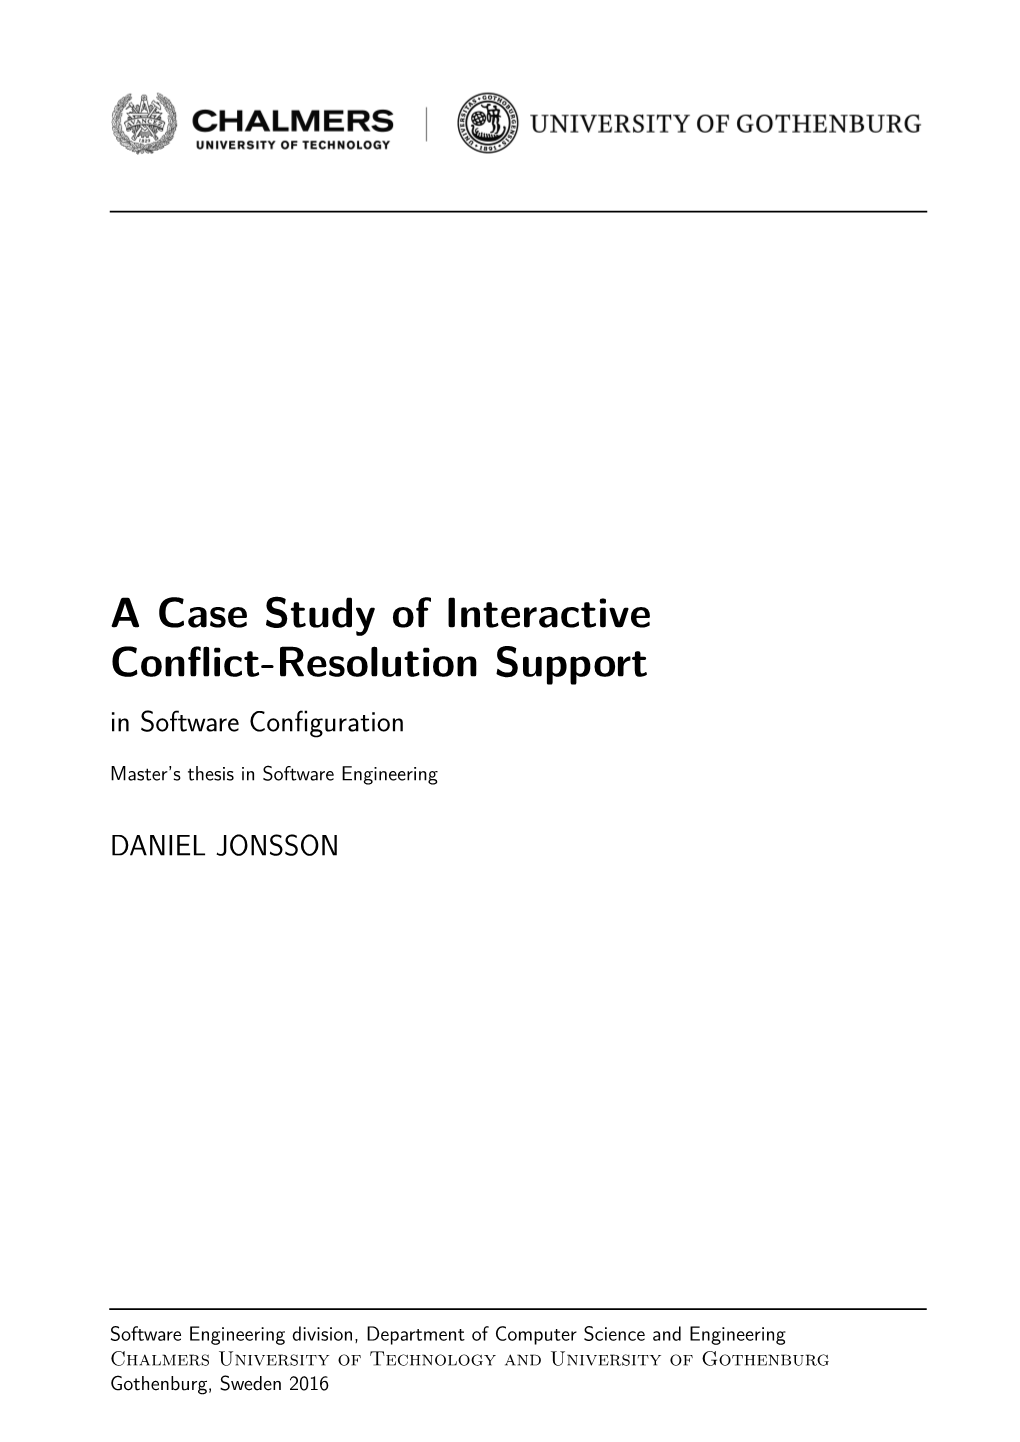 A Case Study of Interactive Conflict-Resolution Support